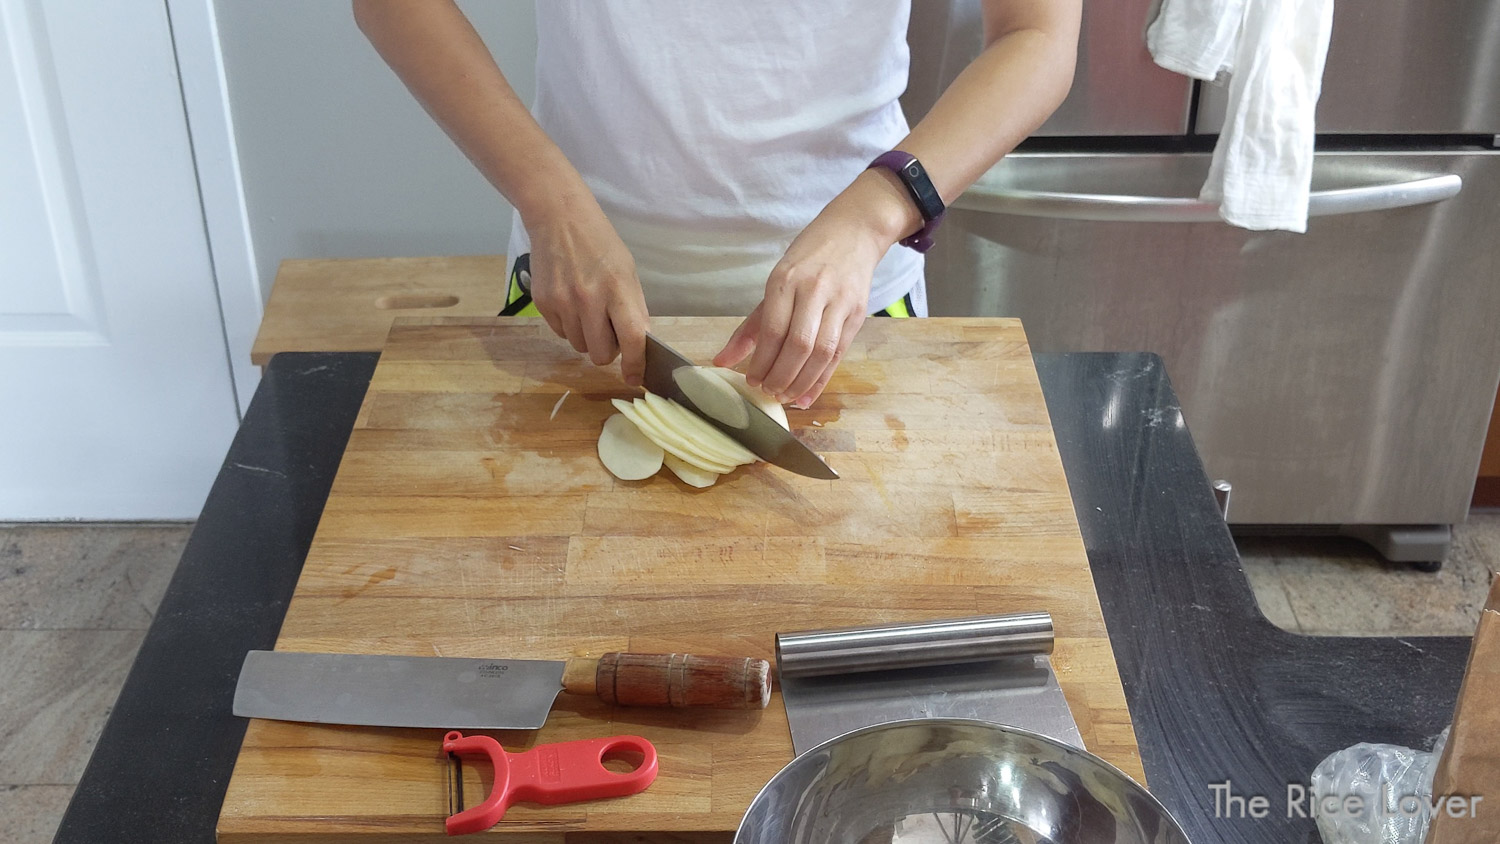 To julienne, first cut the potato into even slices